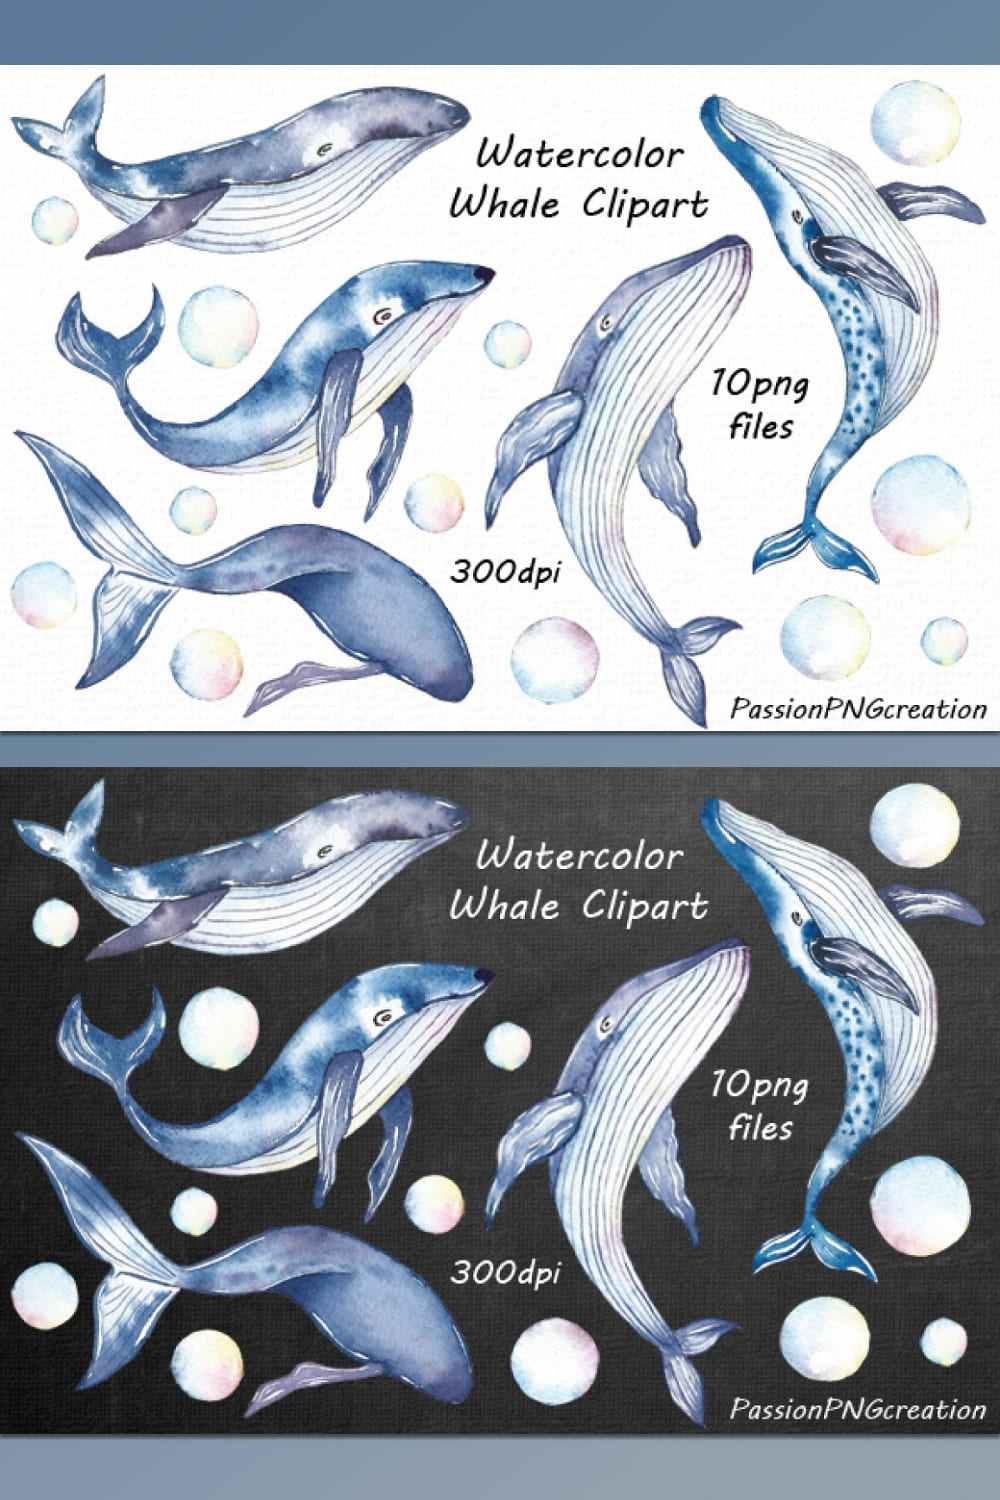 watercolor whale clipart paintings.